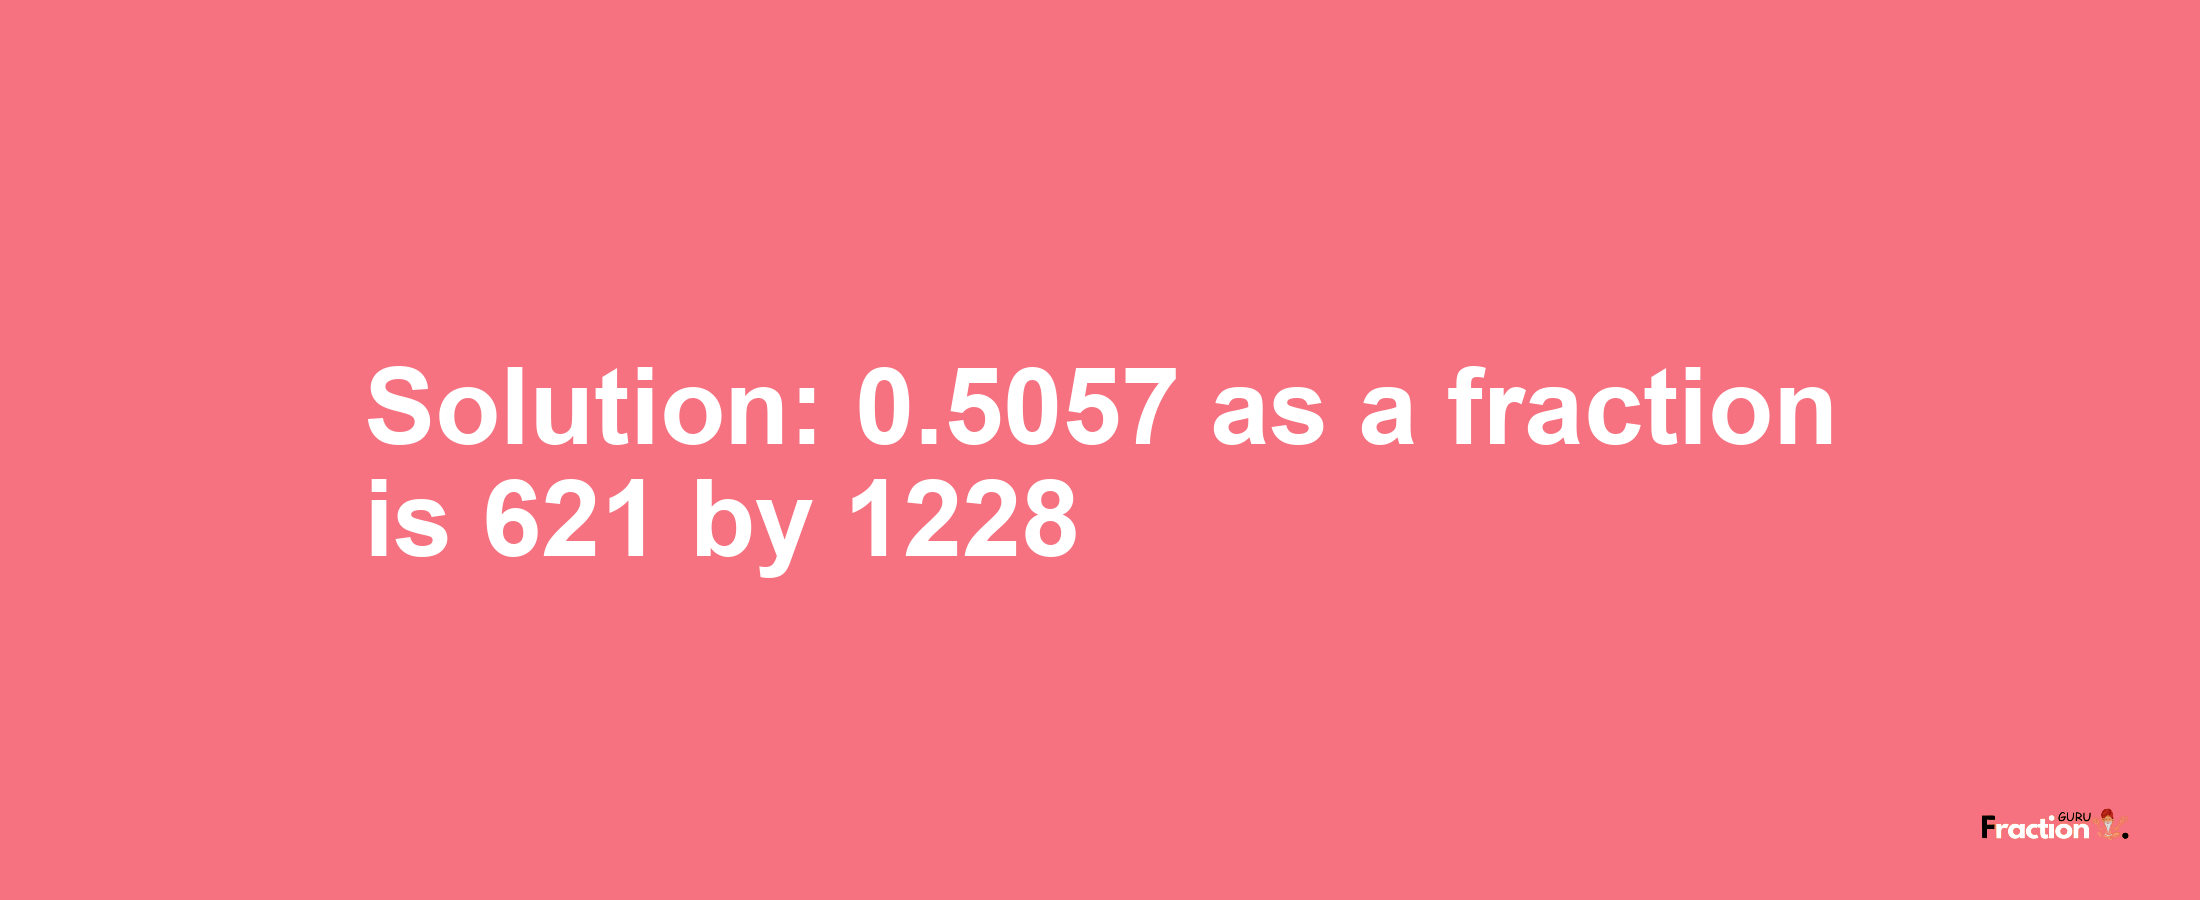 Solution:0.5057 as a fraction is 621/1228